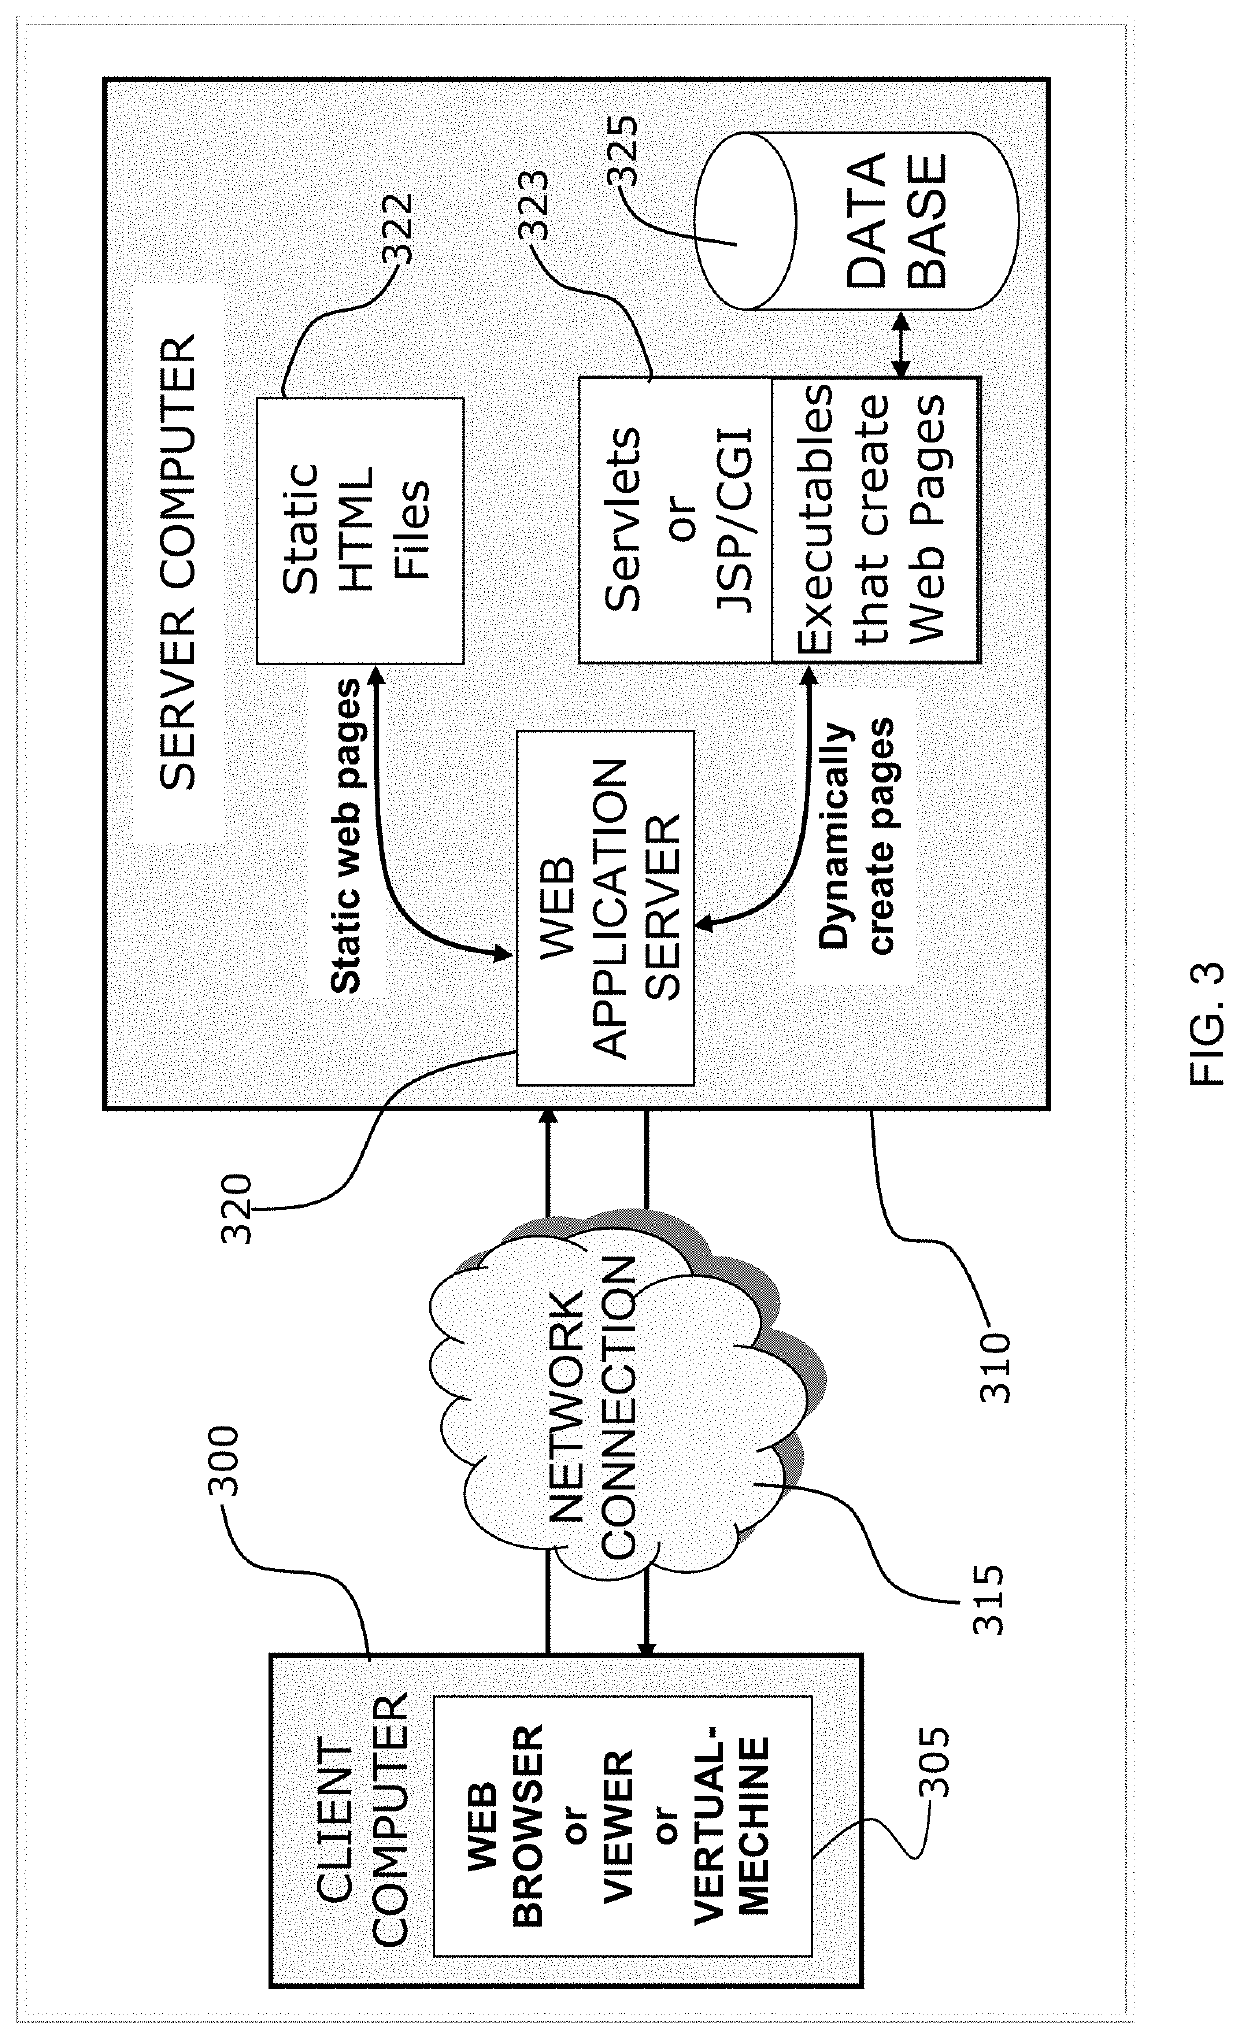 Tools, mechanisms, and processes for transforming modules for an application into pluggable modules